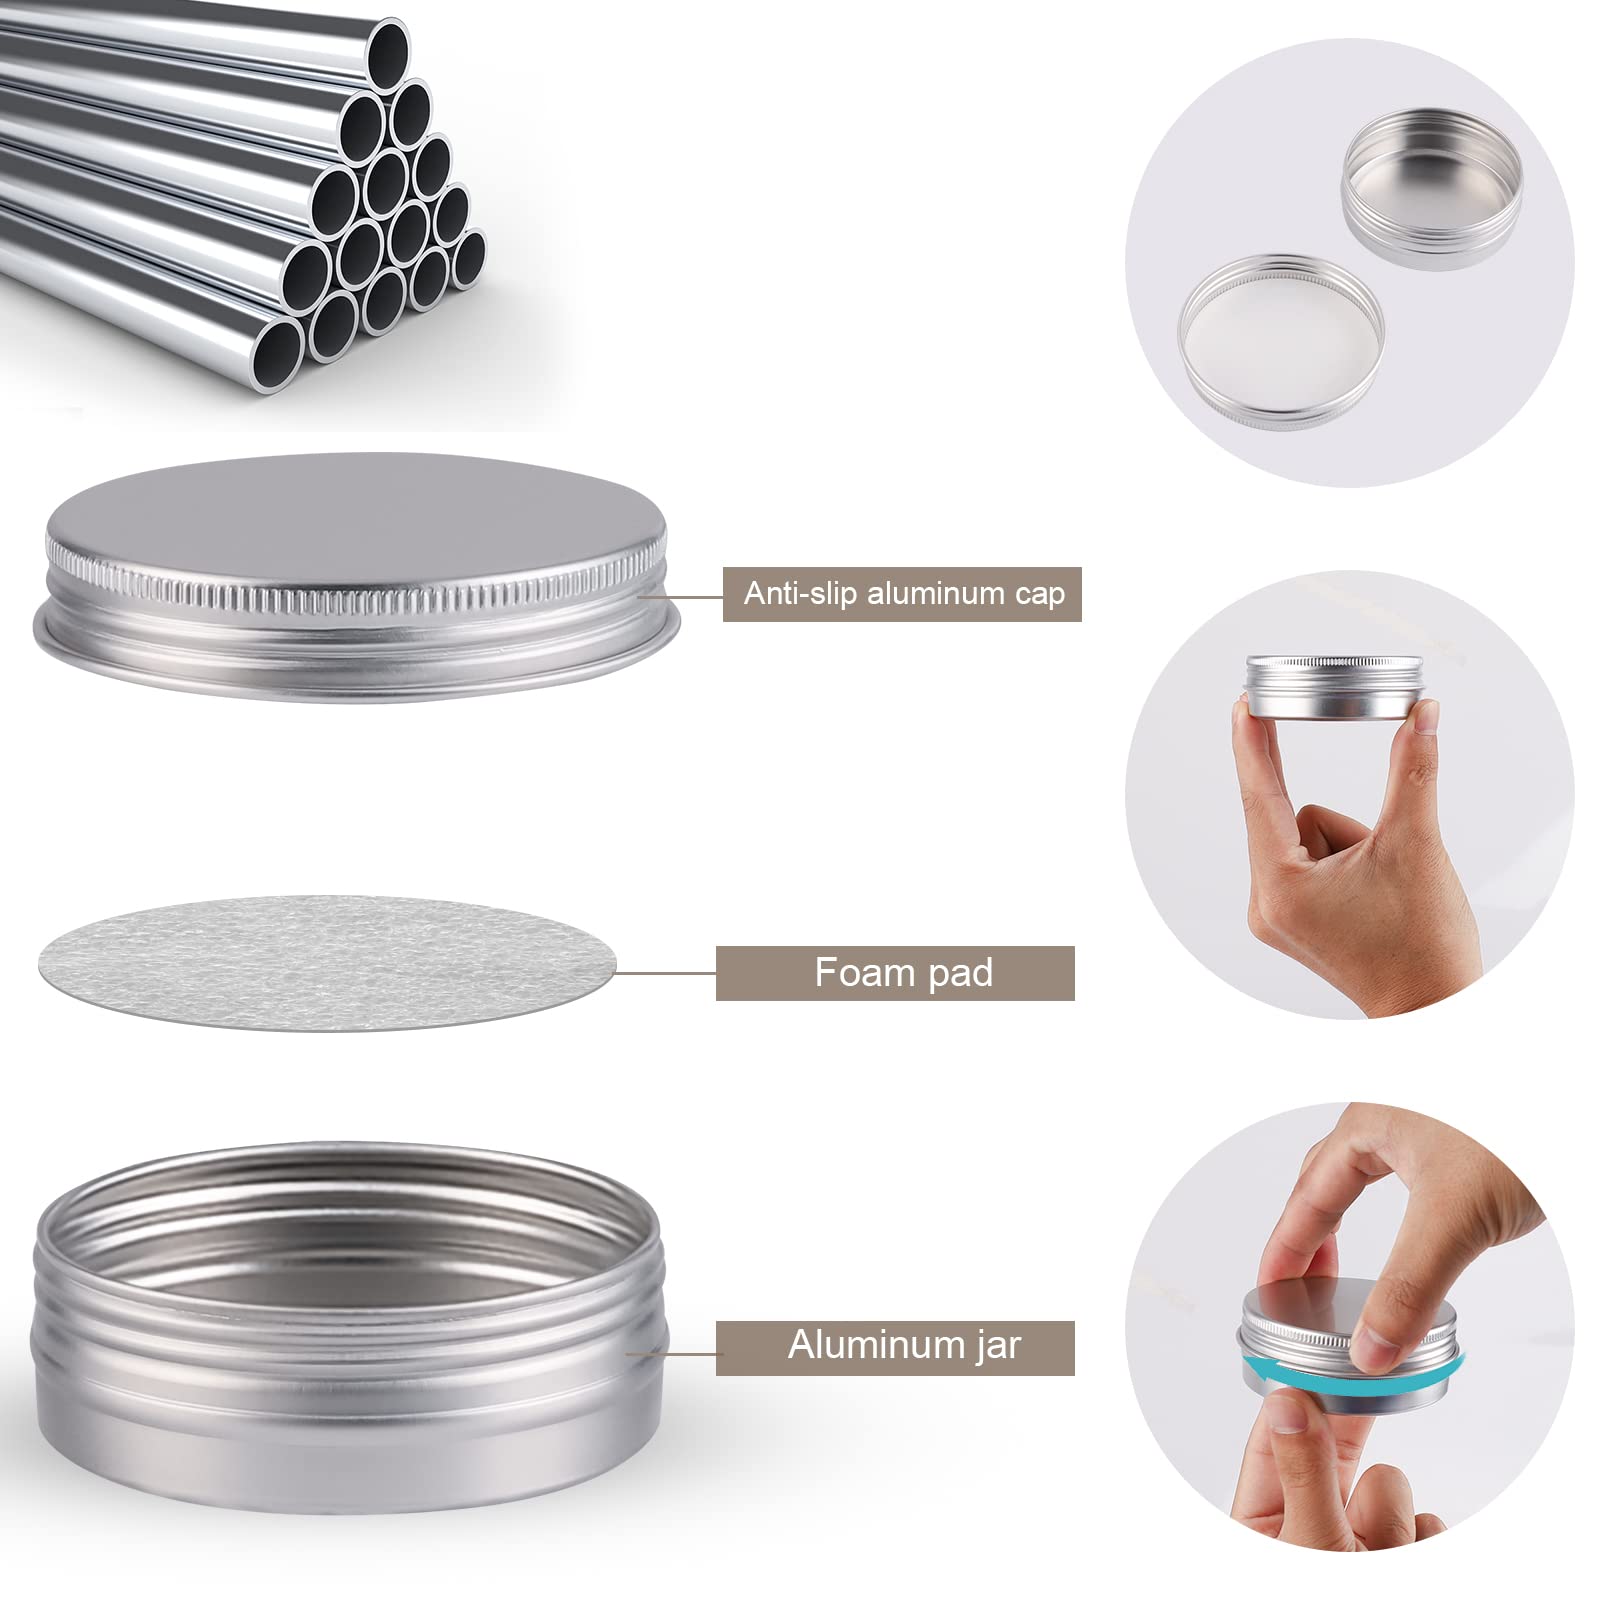 KKDAO 1 oz 30 PACK Aluminum Tin Cans Empty Containers Screw Top Round Metal Cans with Screw Lids for Cosmetic,candle,Spices, Candy, Coffee Beans, DIY, Earrings, Rings, Tea or Gift